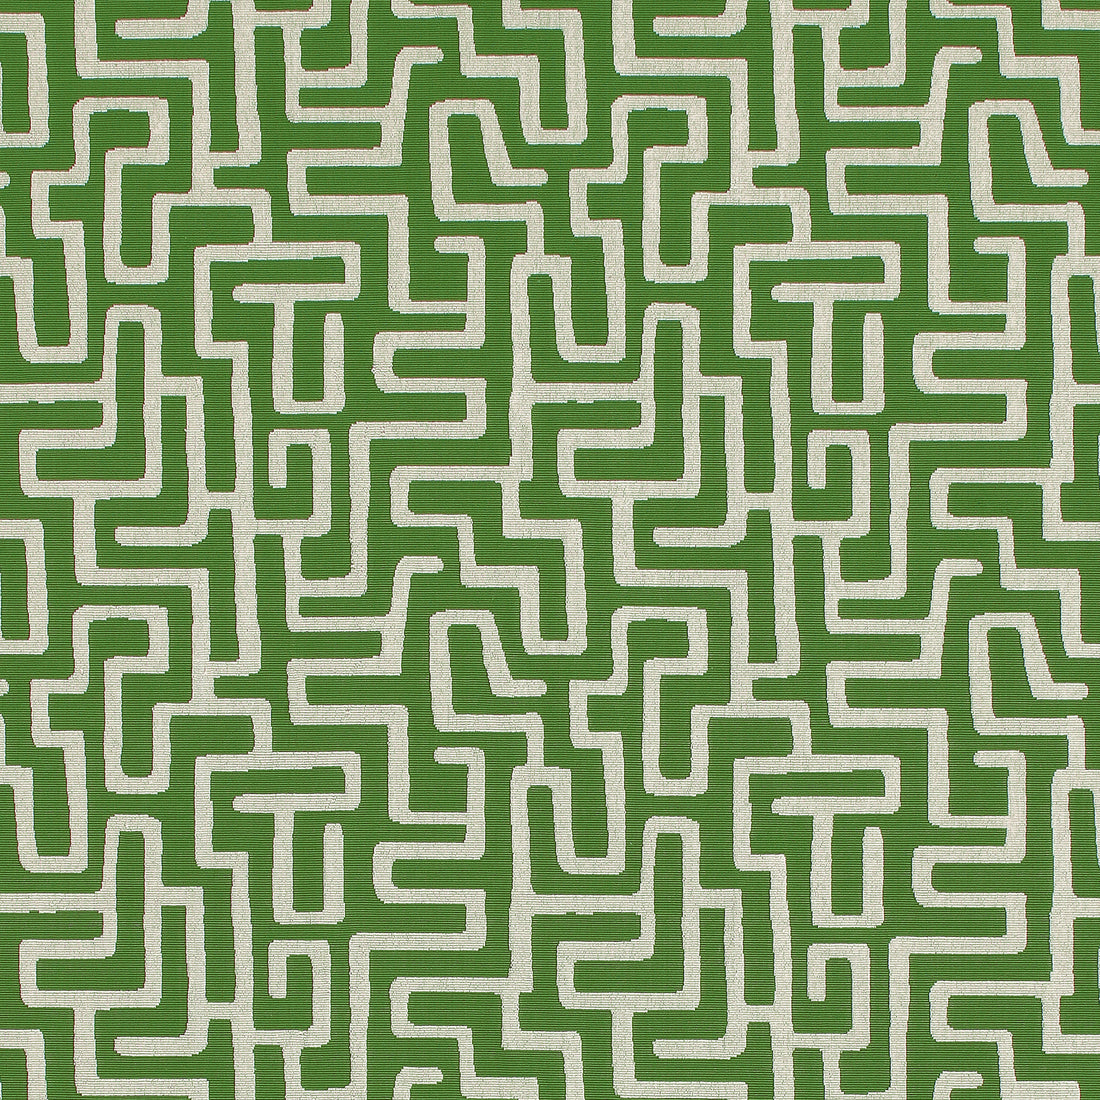 Terrace Lane fabric in spring green color - pattern number W742033 - by Thibaut in the Sojourn collection